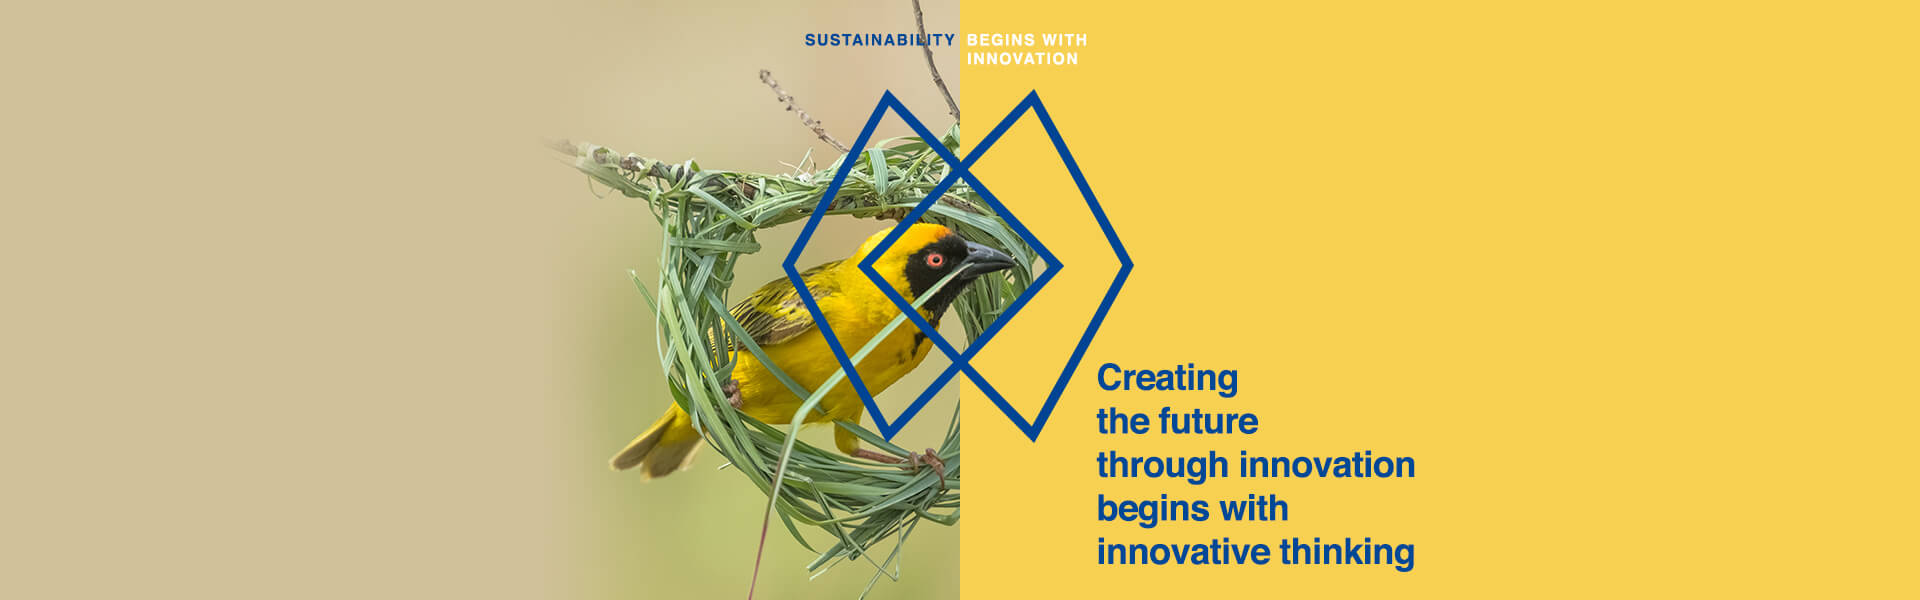 Sustainability begins with innovation